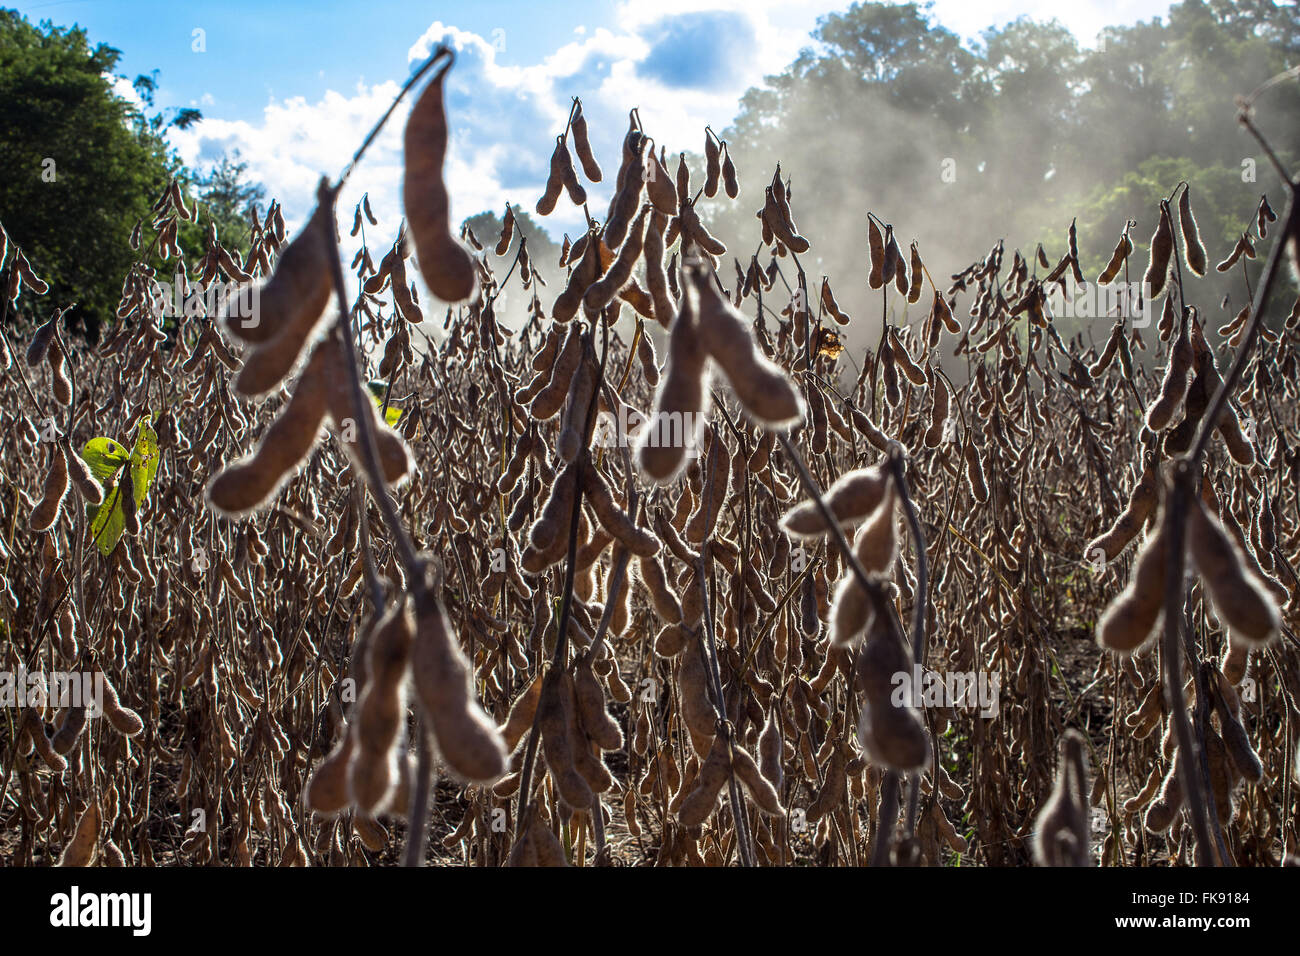 Detail of planting soybeans ready for harvest Stock Photo